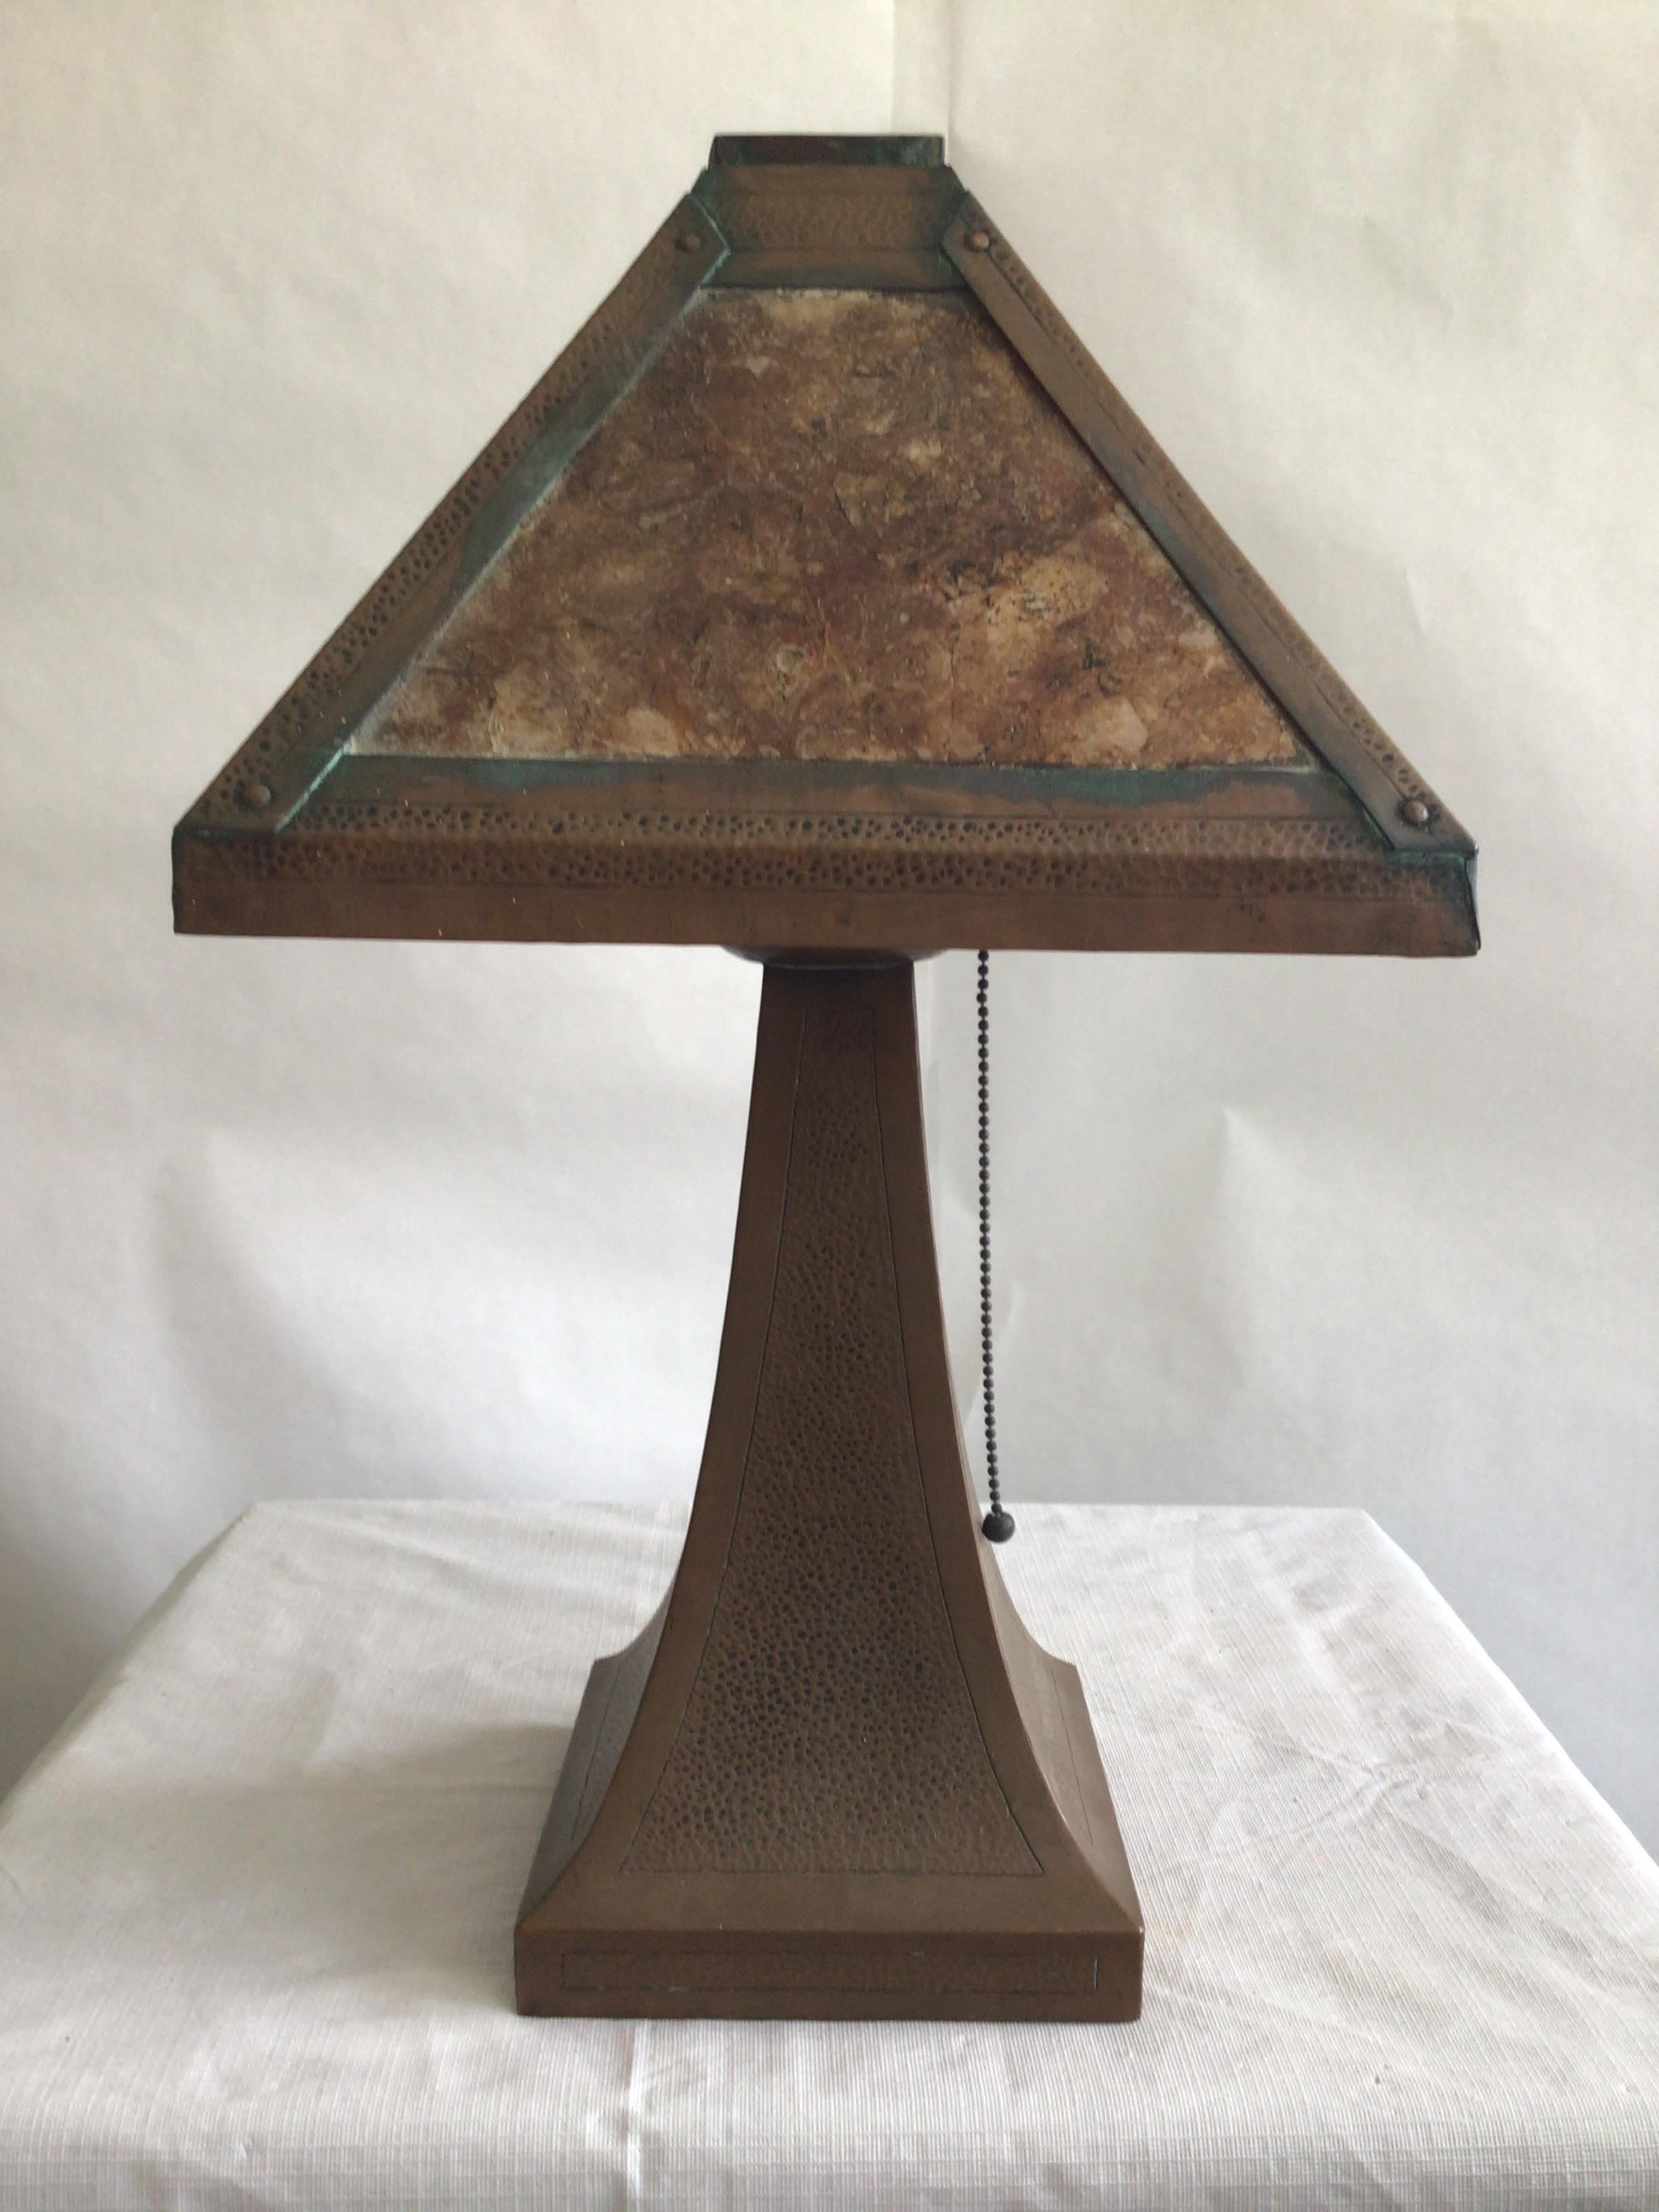 1920s Arts and Crafts Copper Table Lamp With Mica Shade
Lighter in overall weight as this is copper and thin mica stone
Hand-hammered copper is stunning on this Arts & Crafts lamp
Very good condition for what it is
Needs Rewiring